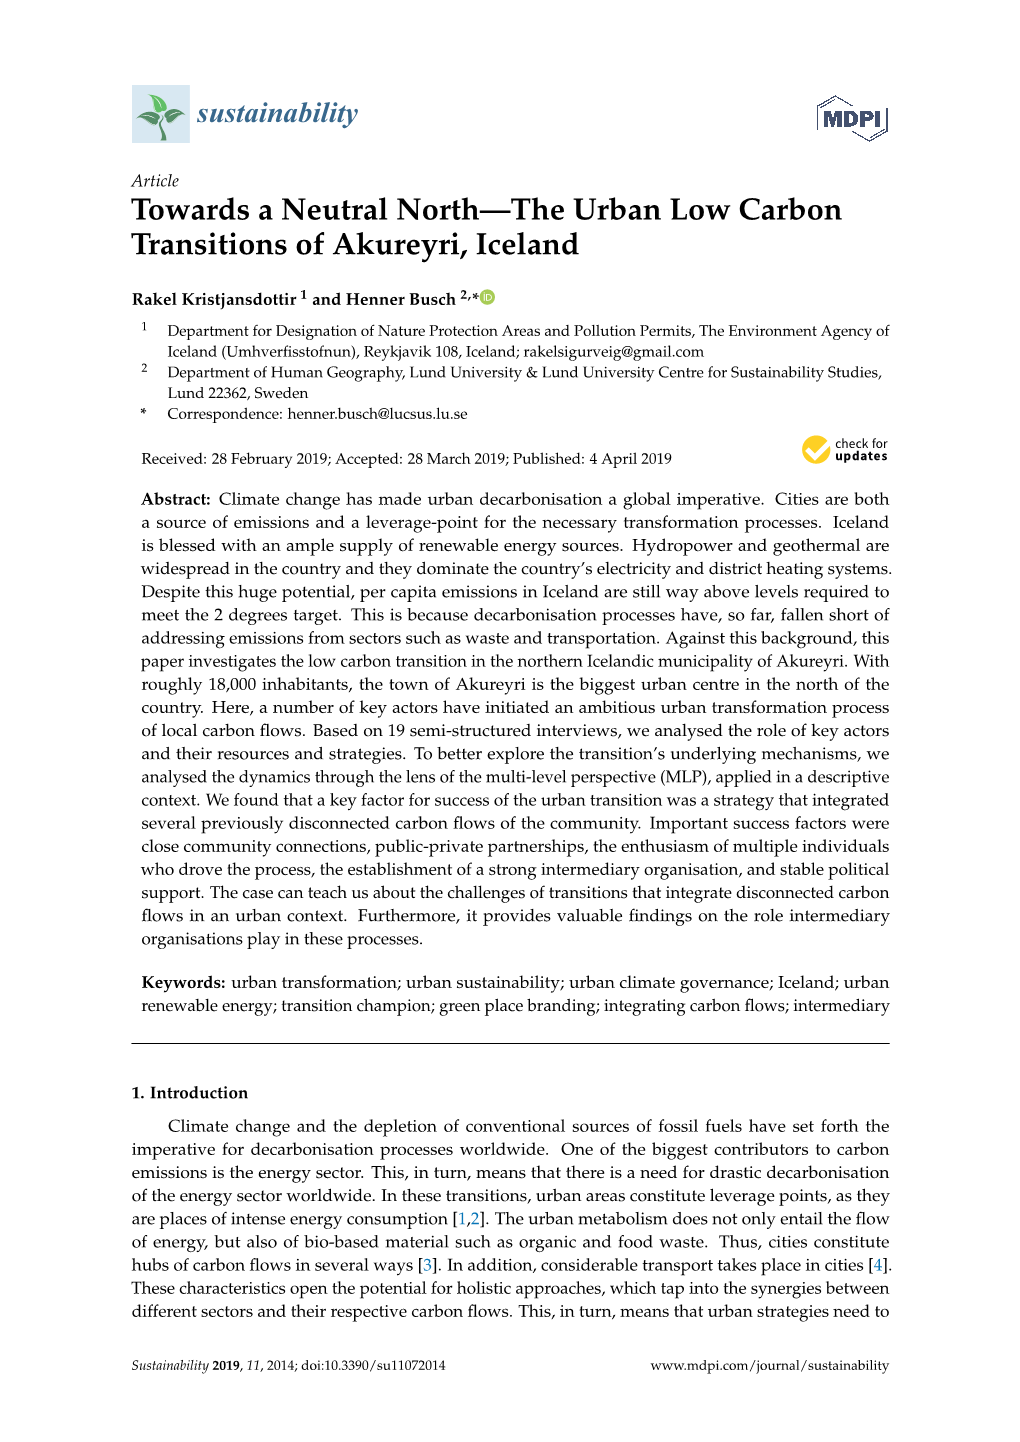 Towards a Neutral North—The Urban Low Carbon Transitions of Akureyri, Iceland